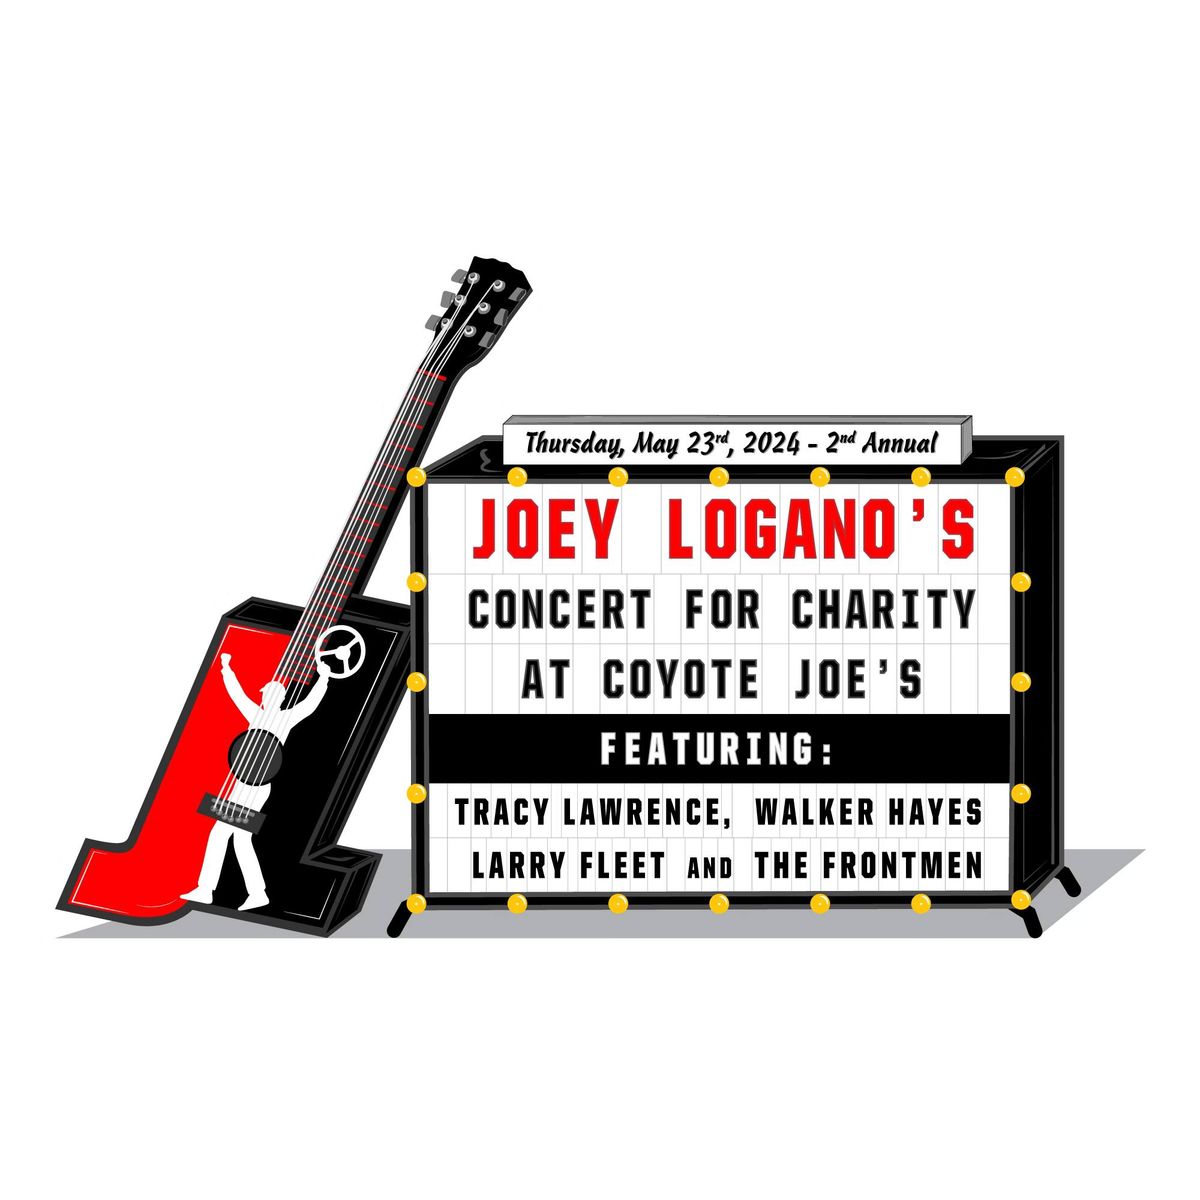 JOEY LOGANO'S 2ND ANNUAL CONCERT FOR CHARITY 